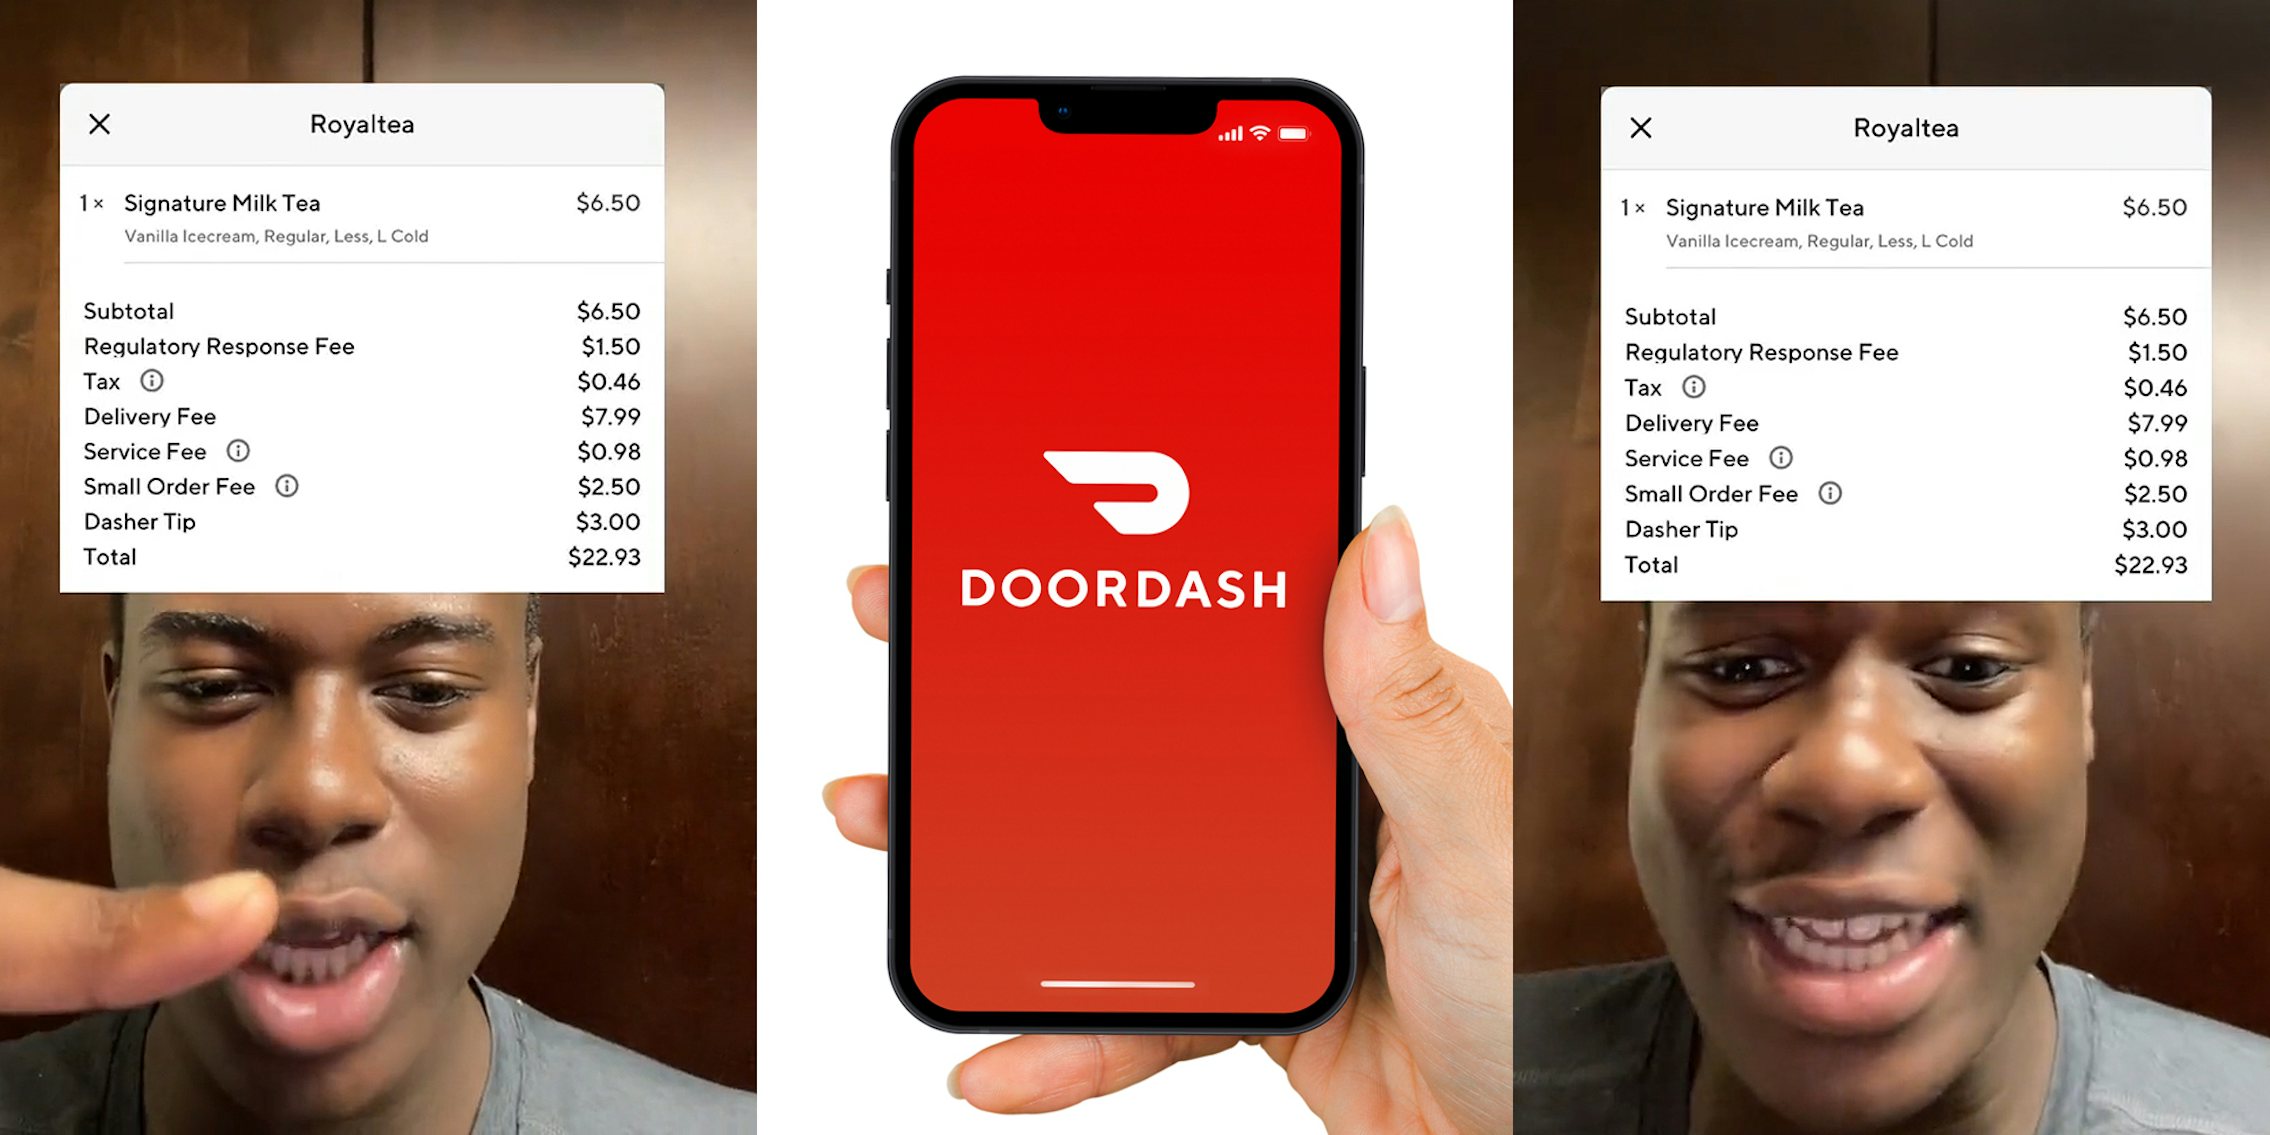 man speaking in front of wooden door pointing finger with DoorDash virtual receipt 'Royaltea 1x Signature Milk Tea $6.50 Subtotal $6.50 Regulatory Response Fee $1.50 Tax $0.46 Delivery Fee $7.99 Service Fee $0.98 Small Order Fee $2.50 Dasher Tip $3.00 Total $22.93' (l) hand holding DoorDash app open on phone on white background (c) man speaking in front of wooden door with DoorDash virtual receipt 'Royaltea 1x Signature Milk Tea $6.50 Subtotal $6.50 Regulatory Response Fee $1.50 Tax $0.46 Delivery Fee $7.99 Service Fee $0.98 Small Order Fee $2.50 Dasher Tip $3.00 Total $22.93' (r)